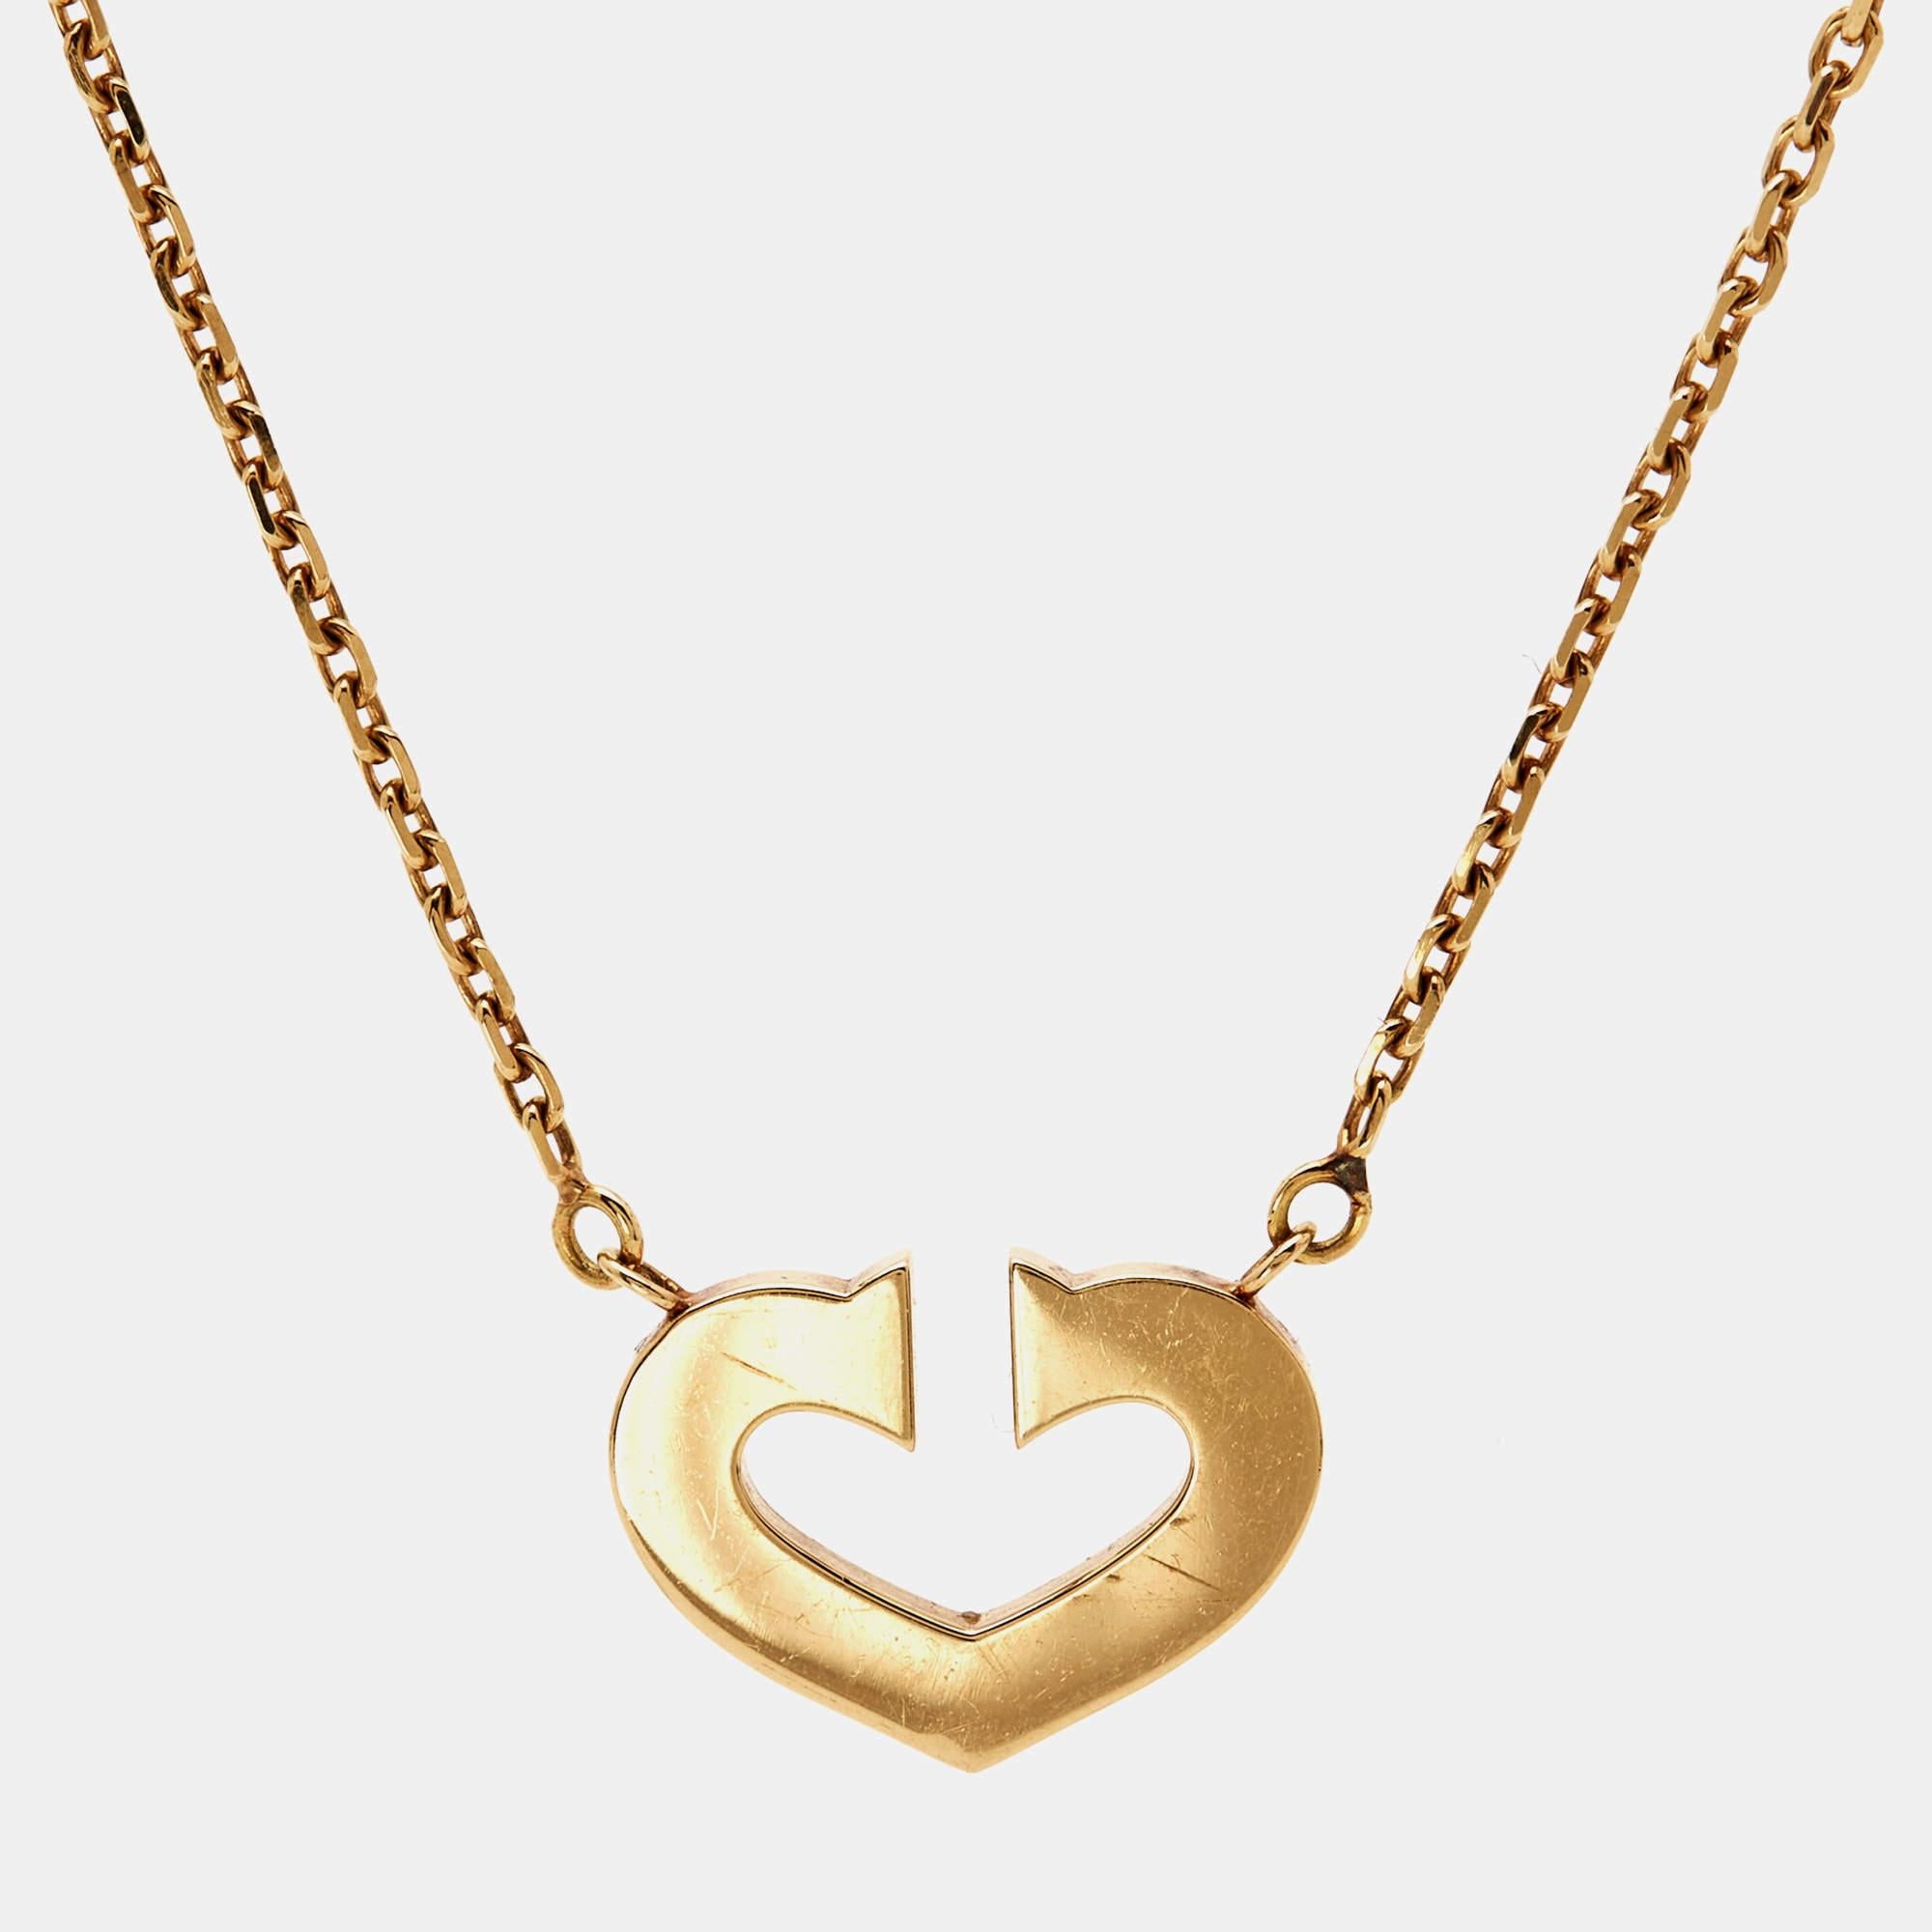 Cartier's C De Cartier necklace is an elegant piece of jewelry that can be sported with everyday ensembles for a subtly chic look. It has an open heart-shaped fixed pendant that exudes a polished finish. Rendered in 18k yellow gold, this minimally